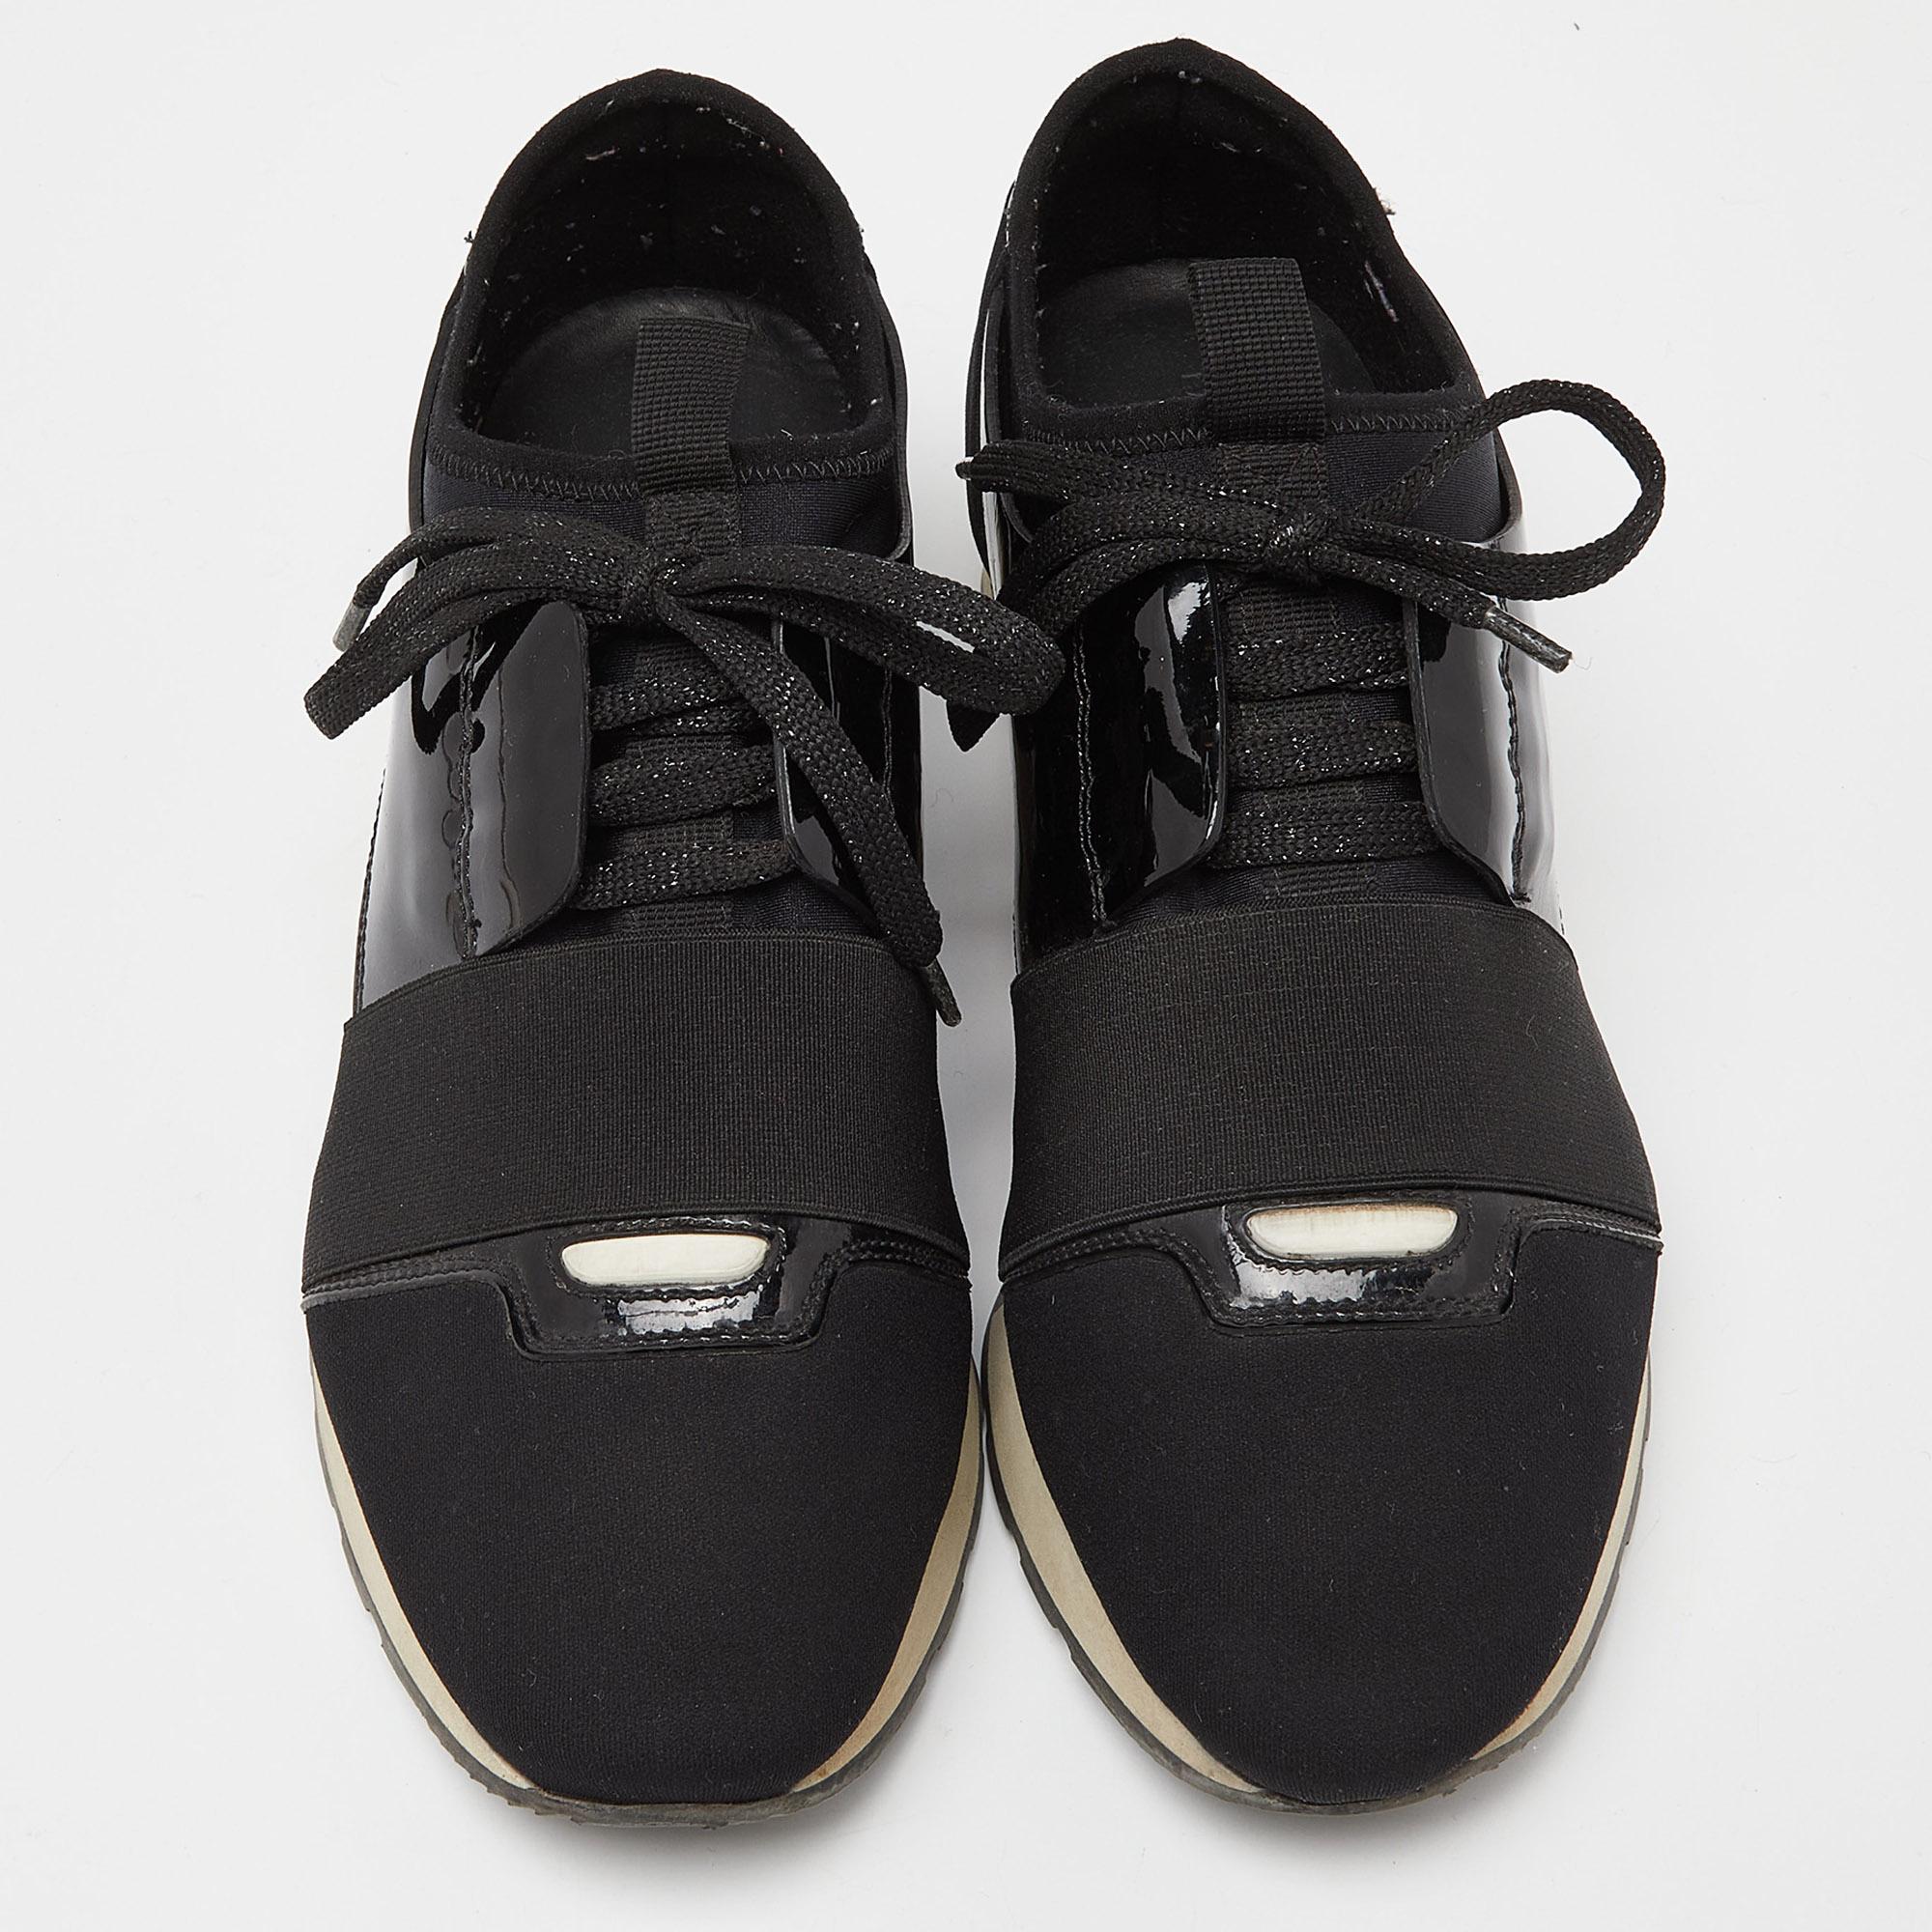 Packed with style and comfort, these Balenciaga sneakers are gentle on the feet so that you can glide through the day. They have a sleek upper with lace closure and they're set on durable rubber soles.

Includes: Original Dustbag

